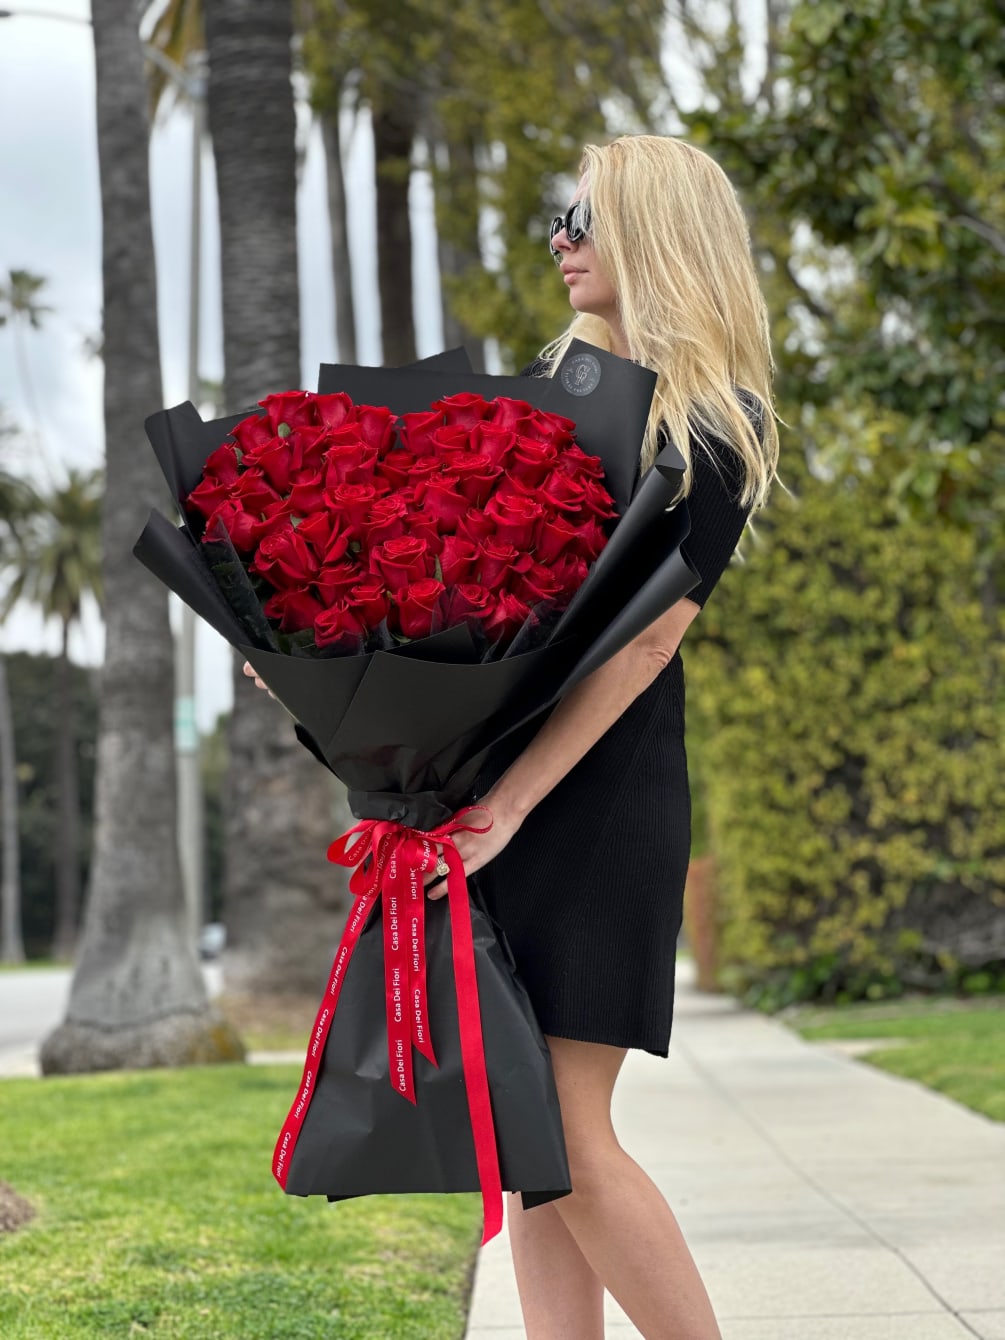 Our exclusive bouquet of red along stem roses arranged in the shape